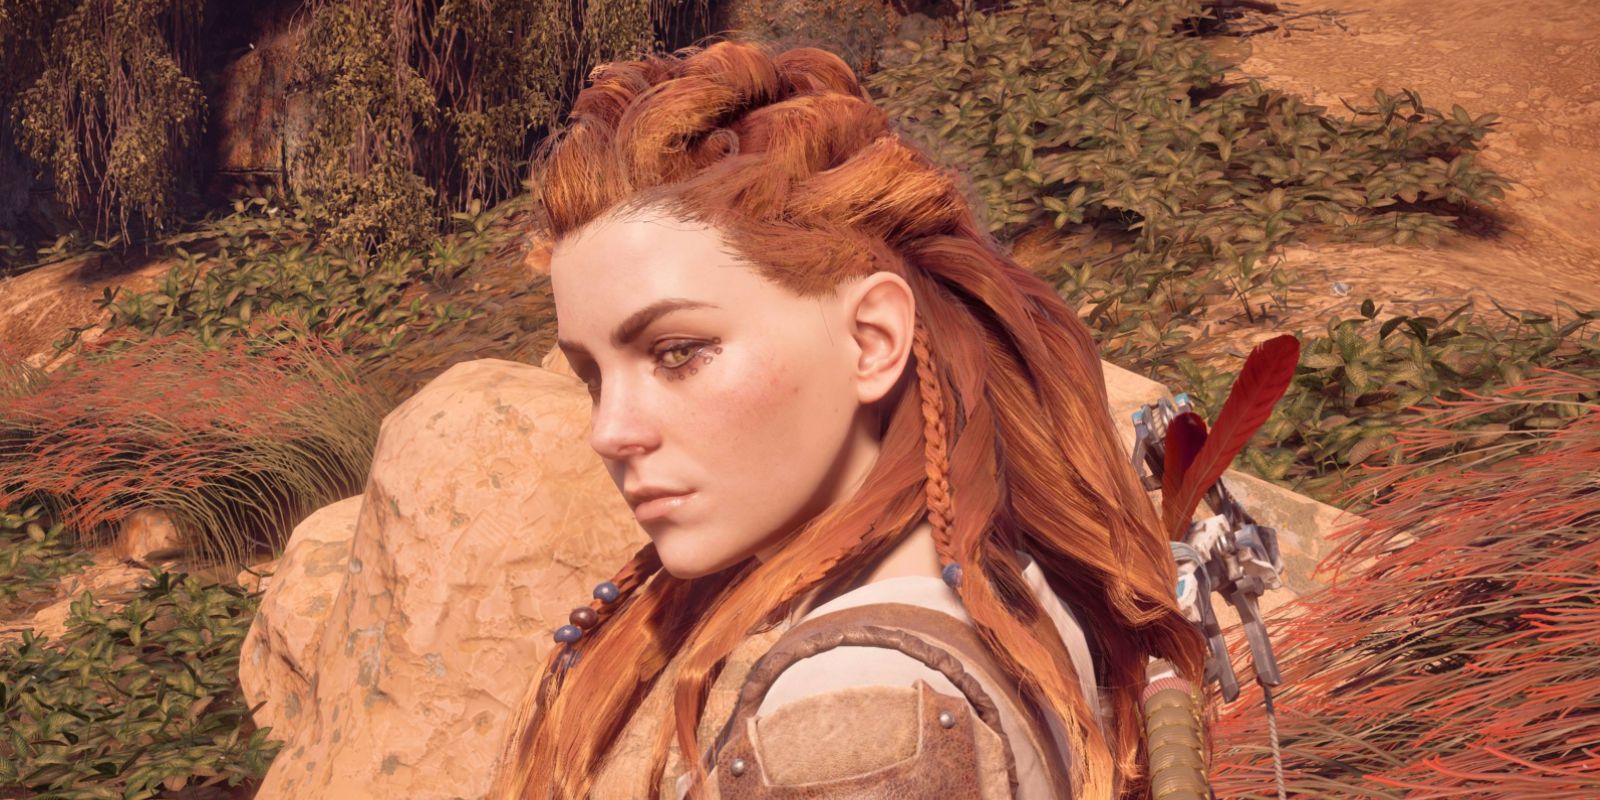 Aloy looks to her side in the wild desert in the video game Horizon Zero Dawn.